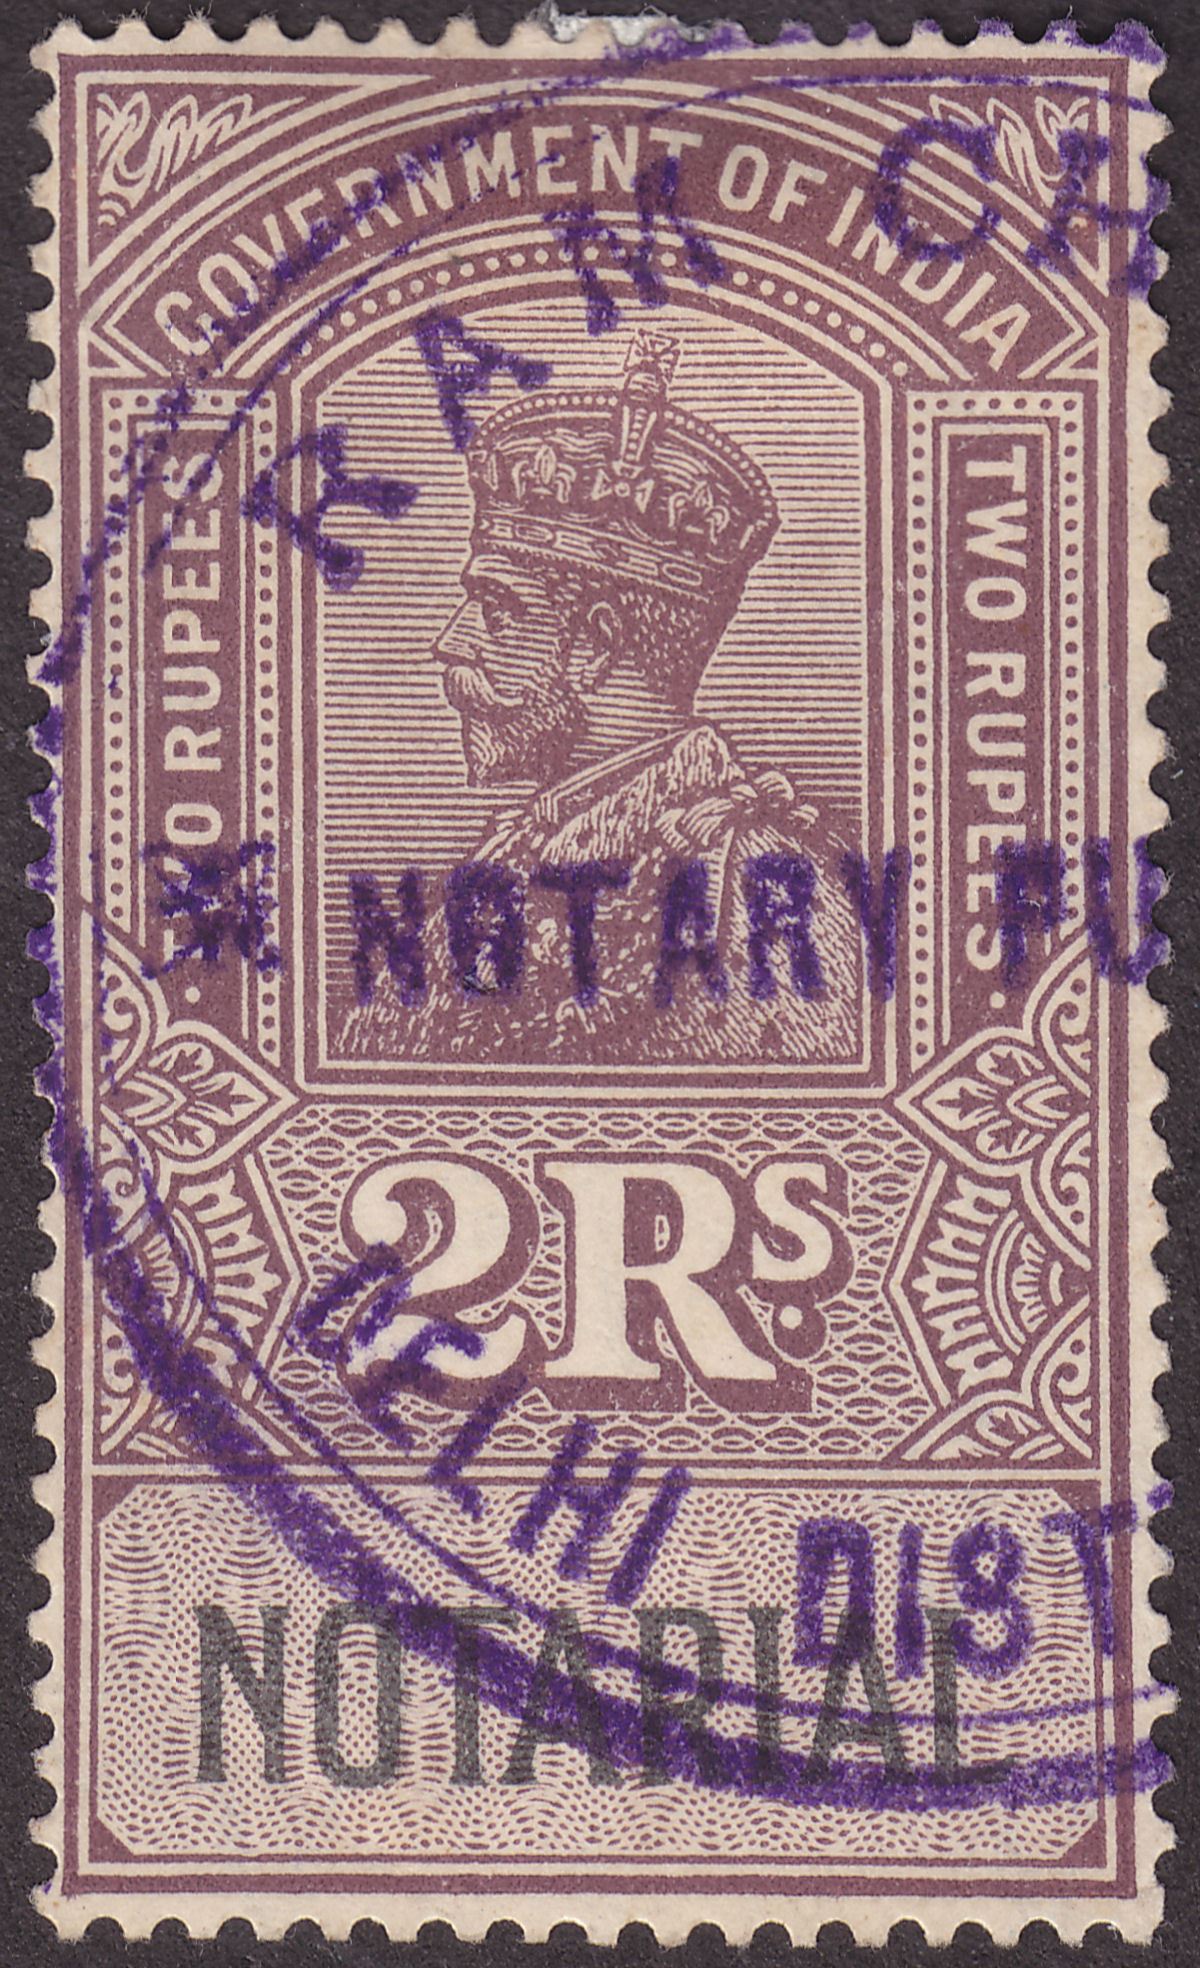 India 1925 KGV Revenue Notarial 2r Purple and Black Used BF41